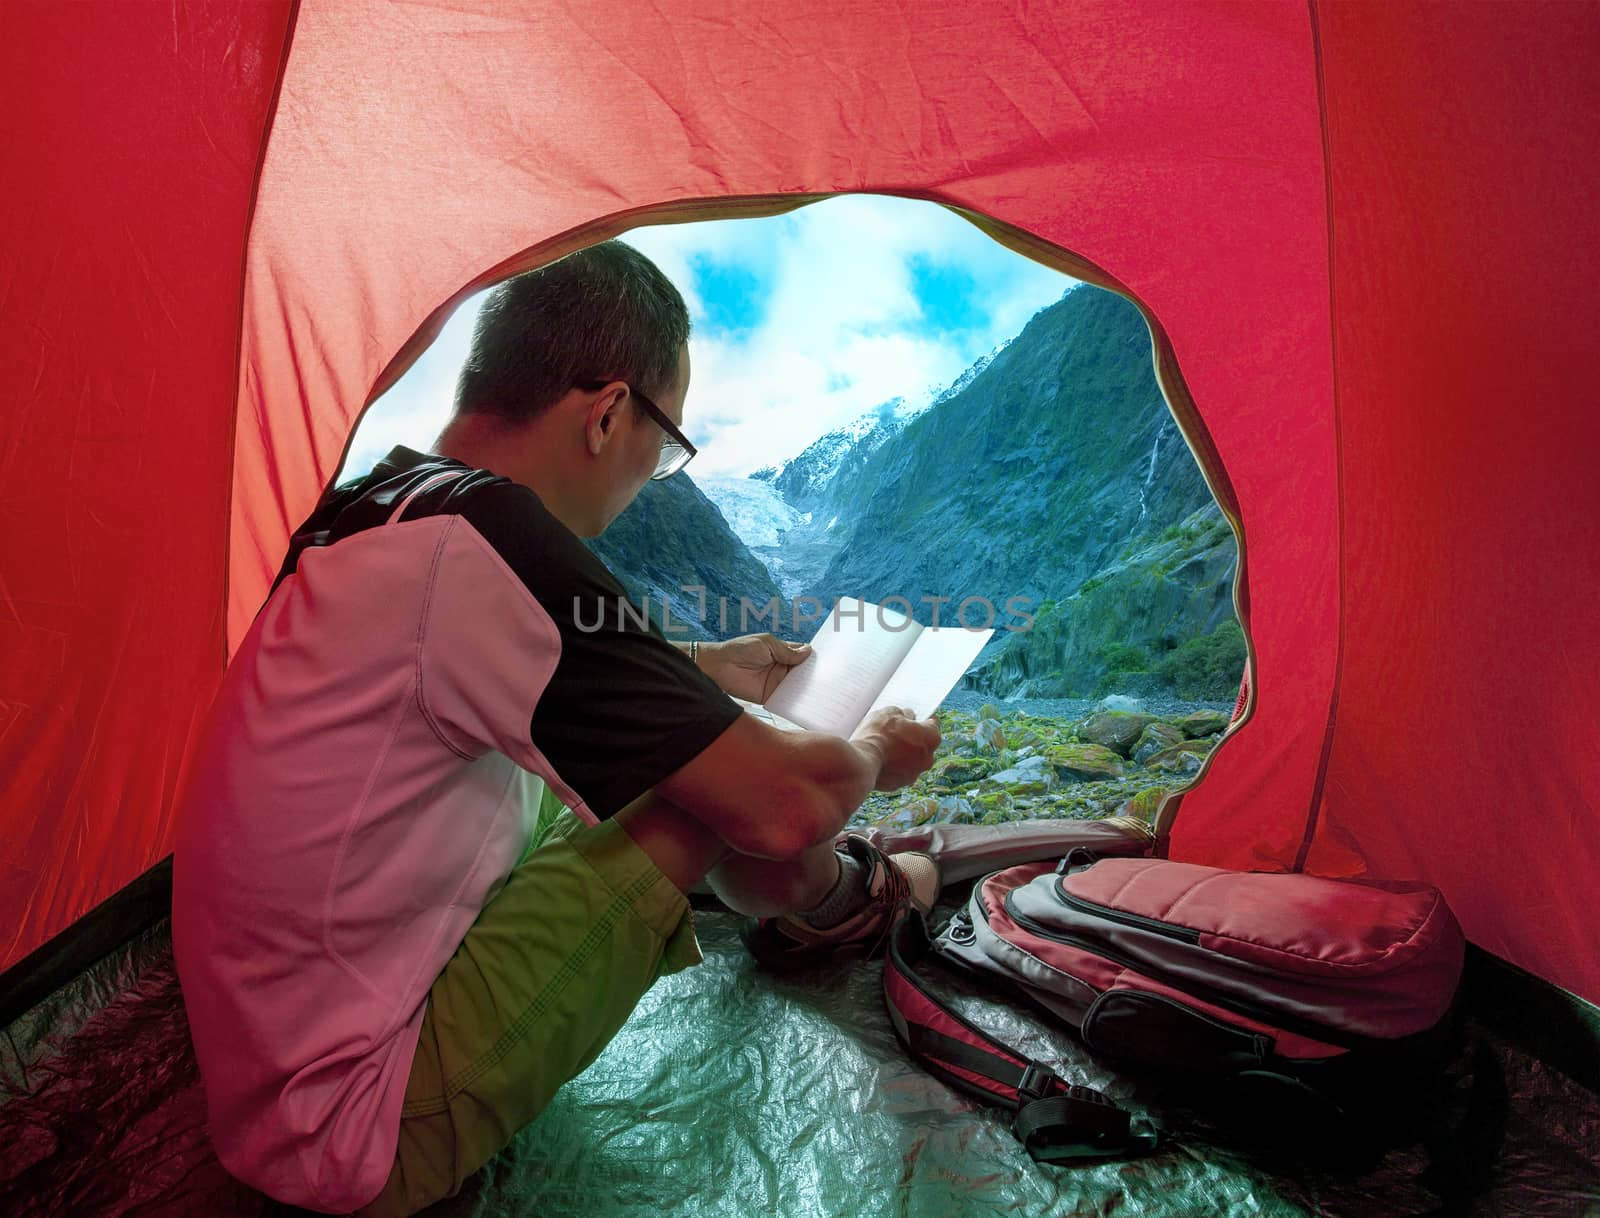 camping man reading a traveling guild book in camp tent beautiful mountain scenic